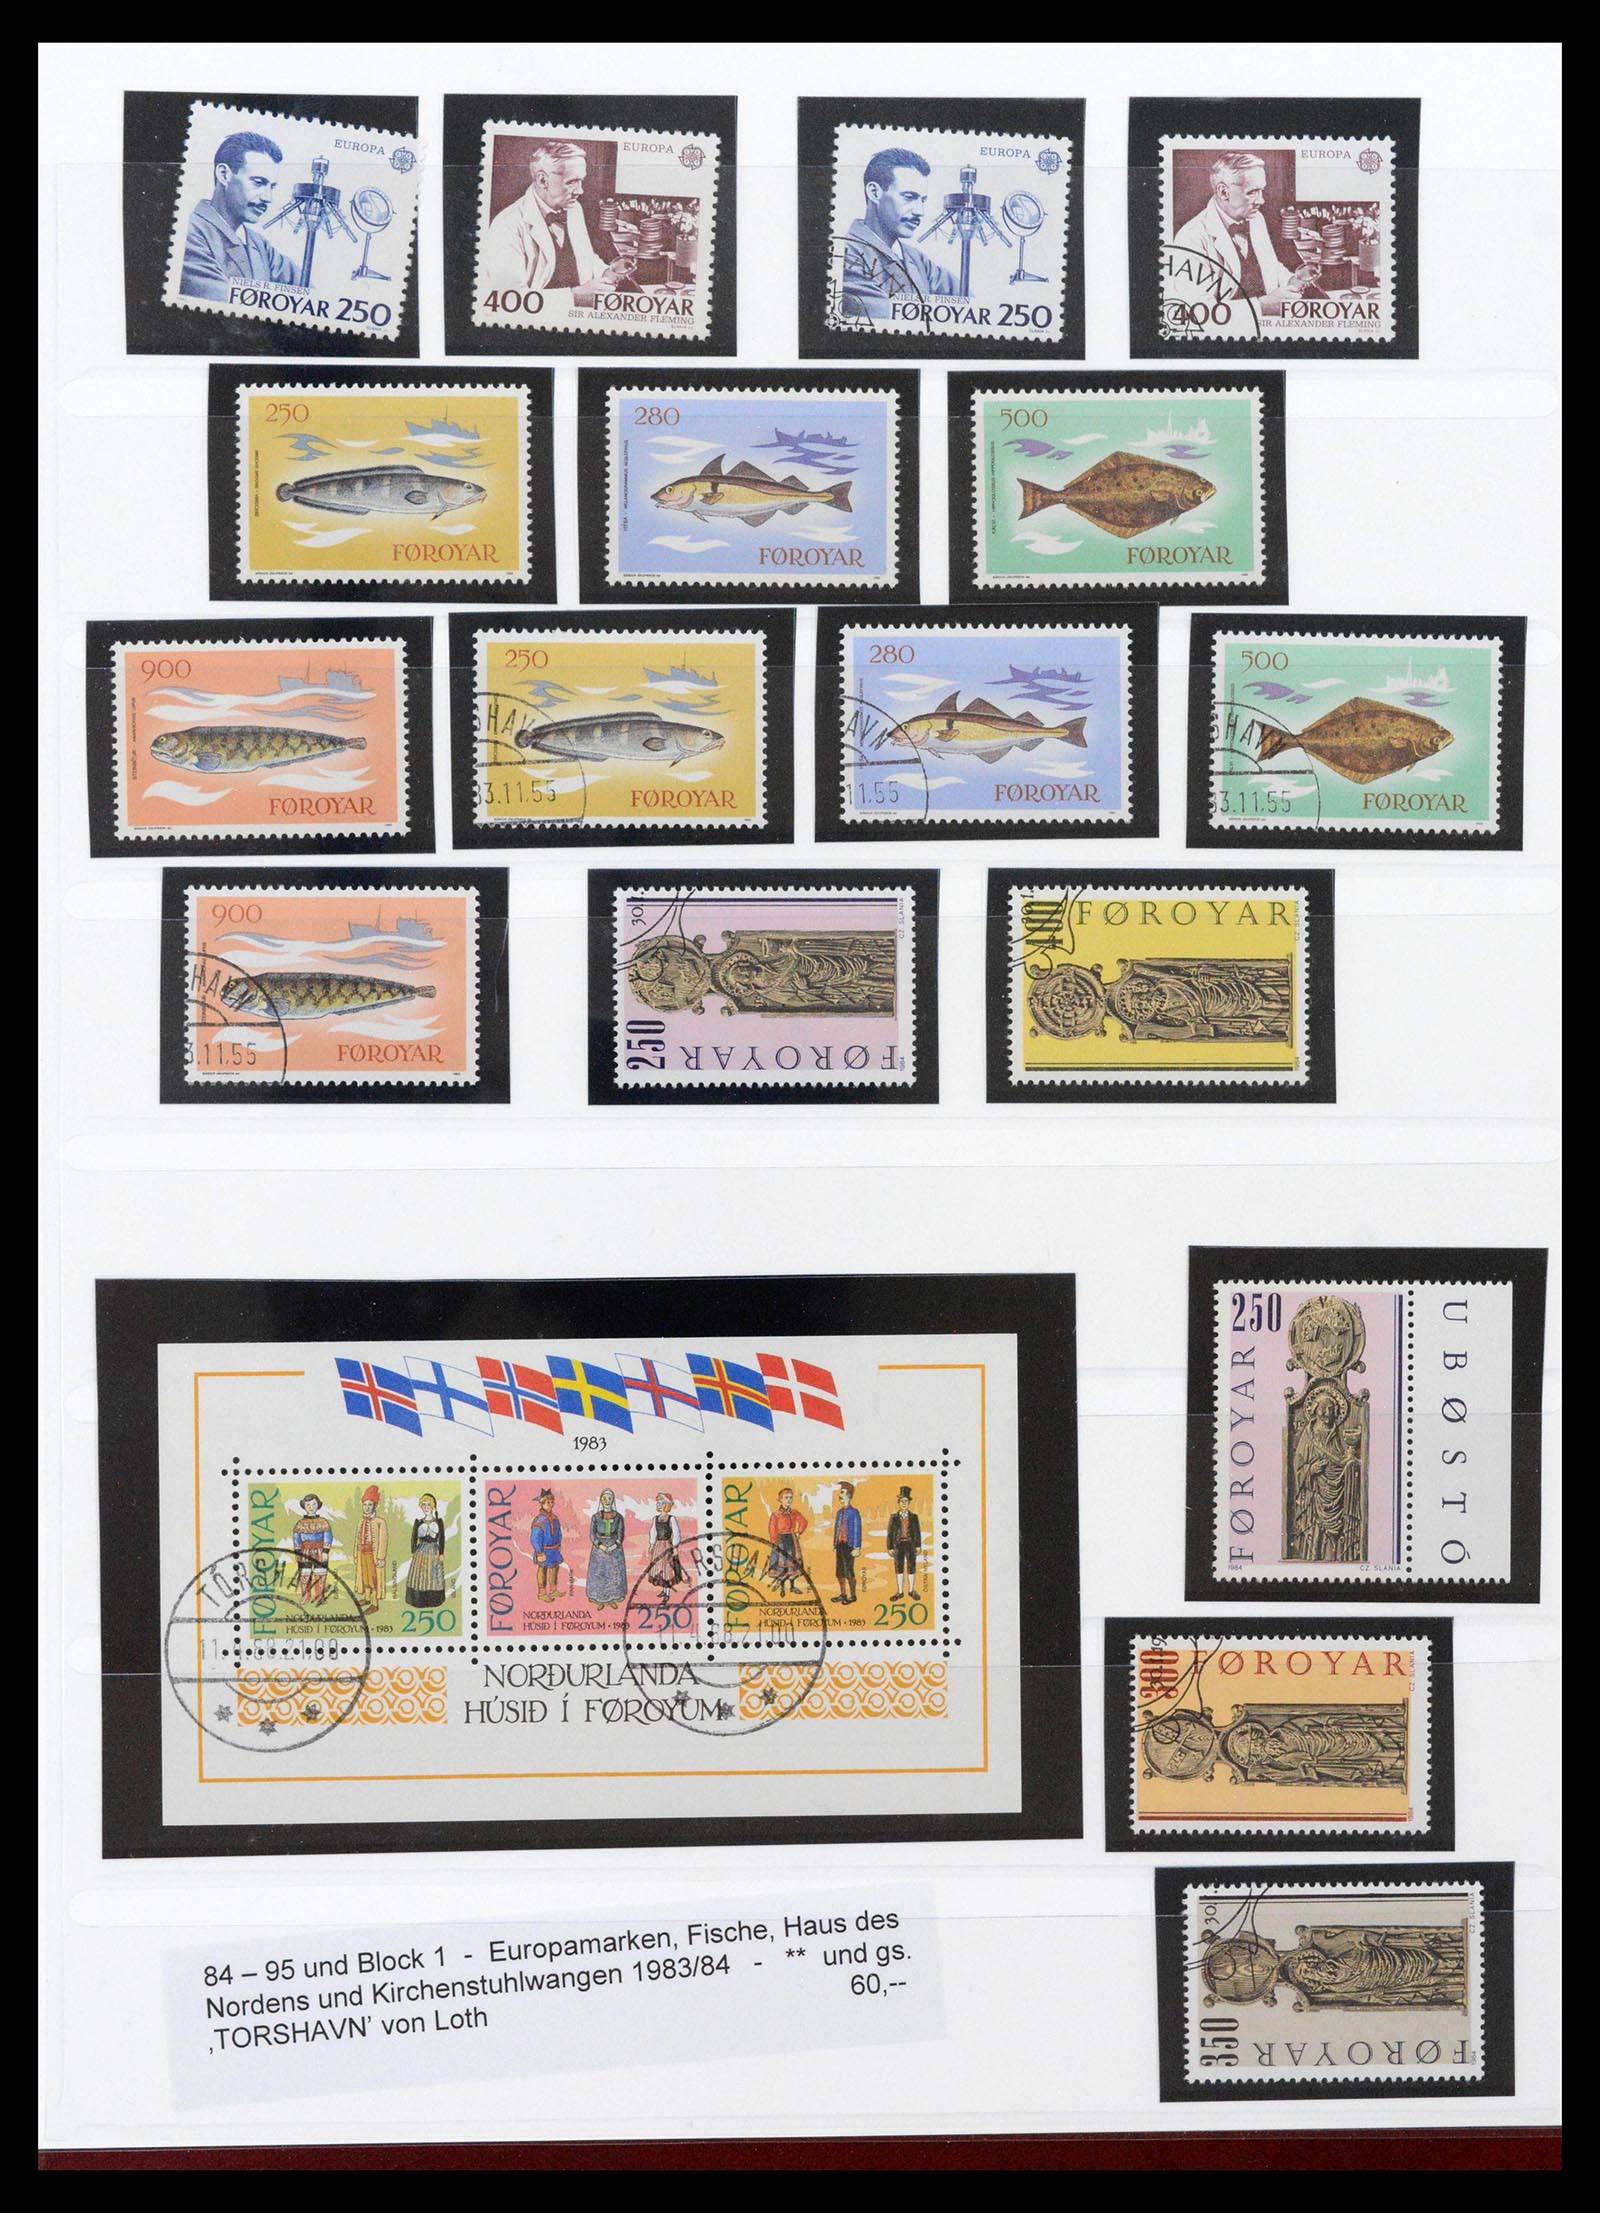 39186 0011 - Stamp collection 39186 Faroe Islands 1919-1996.